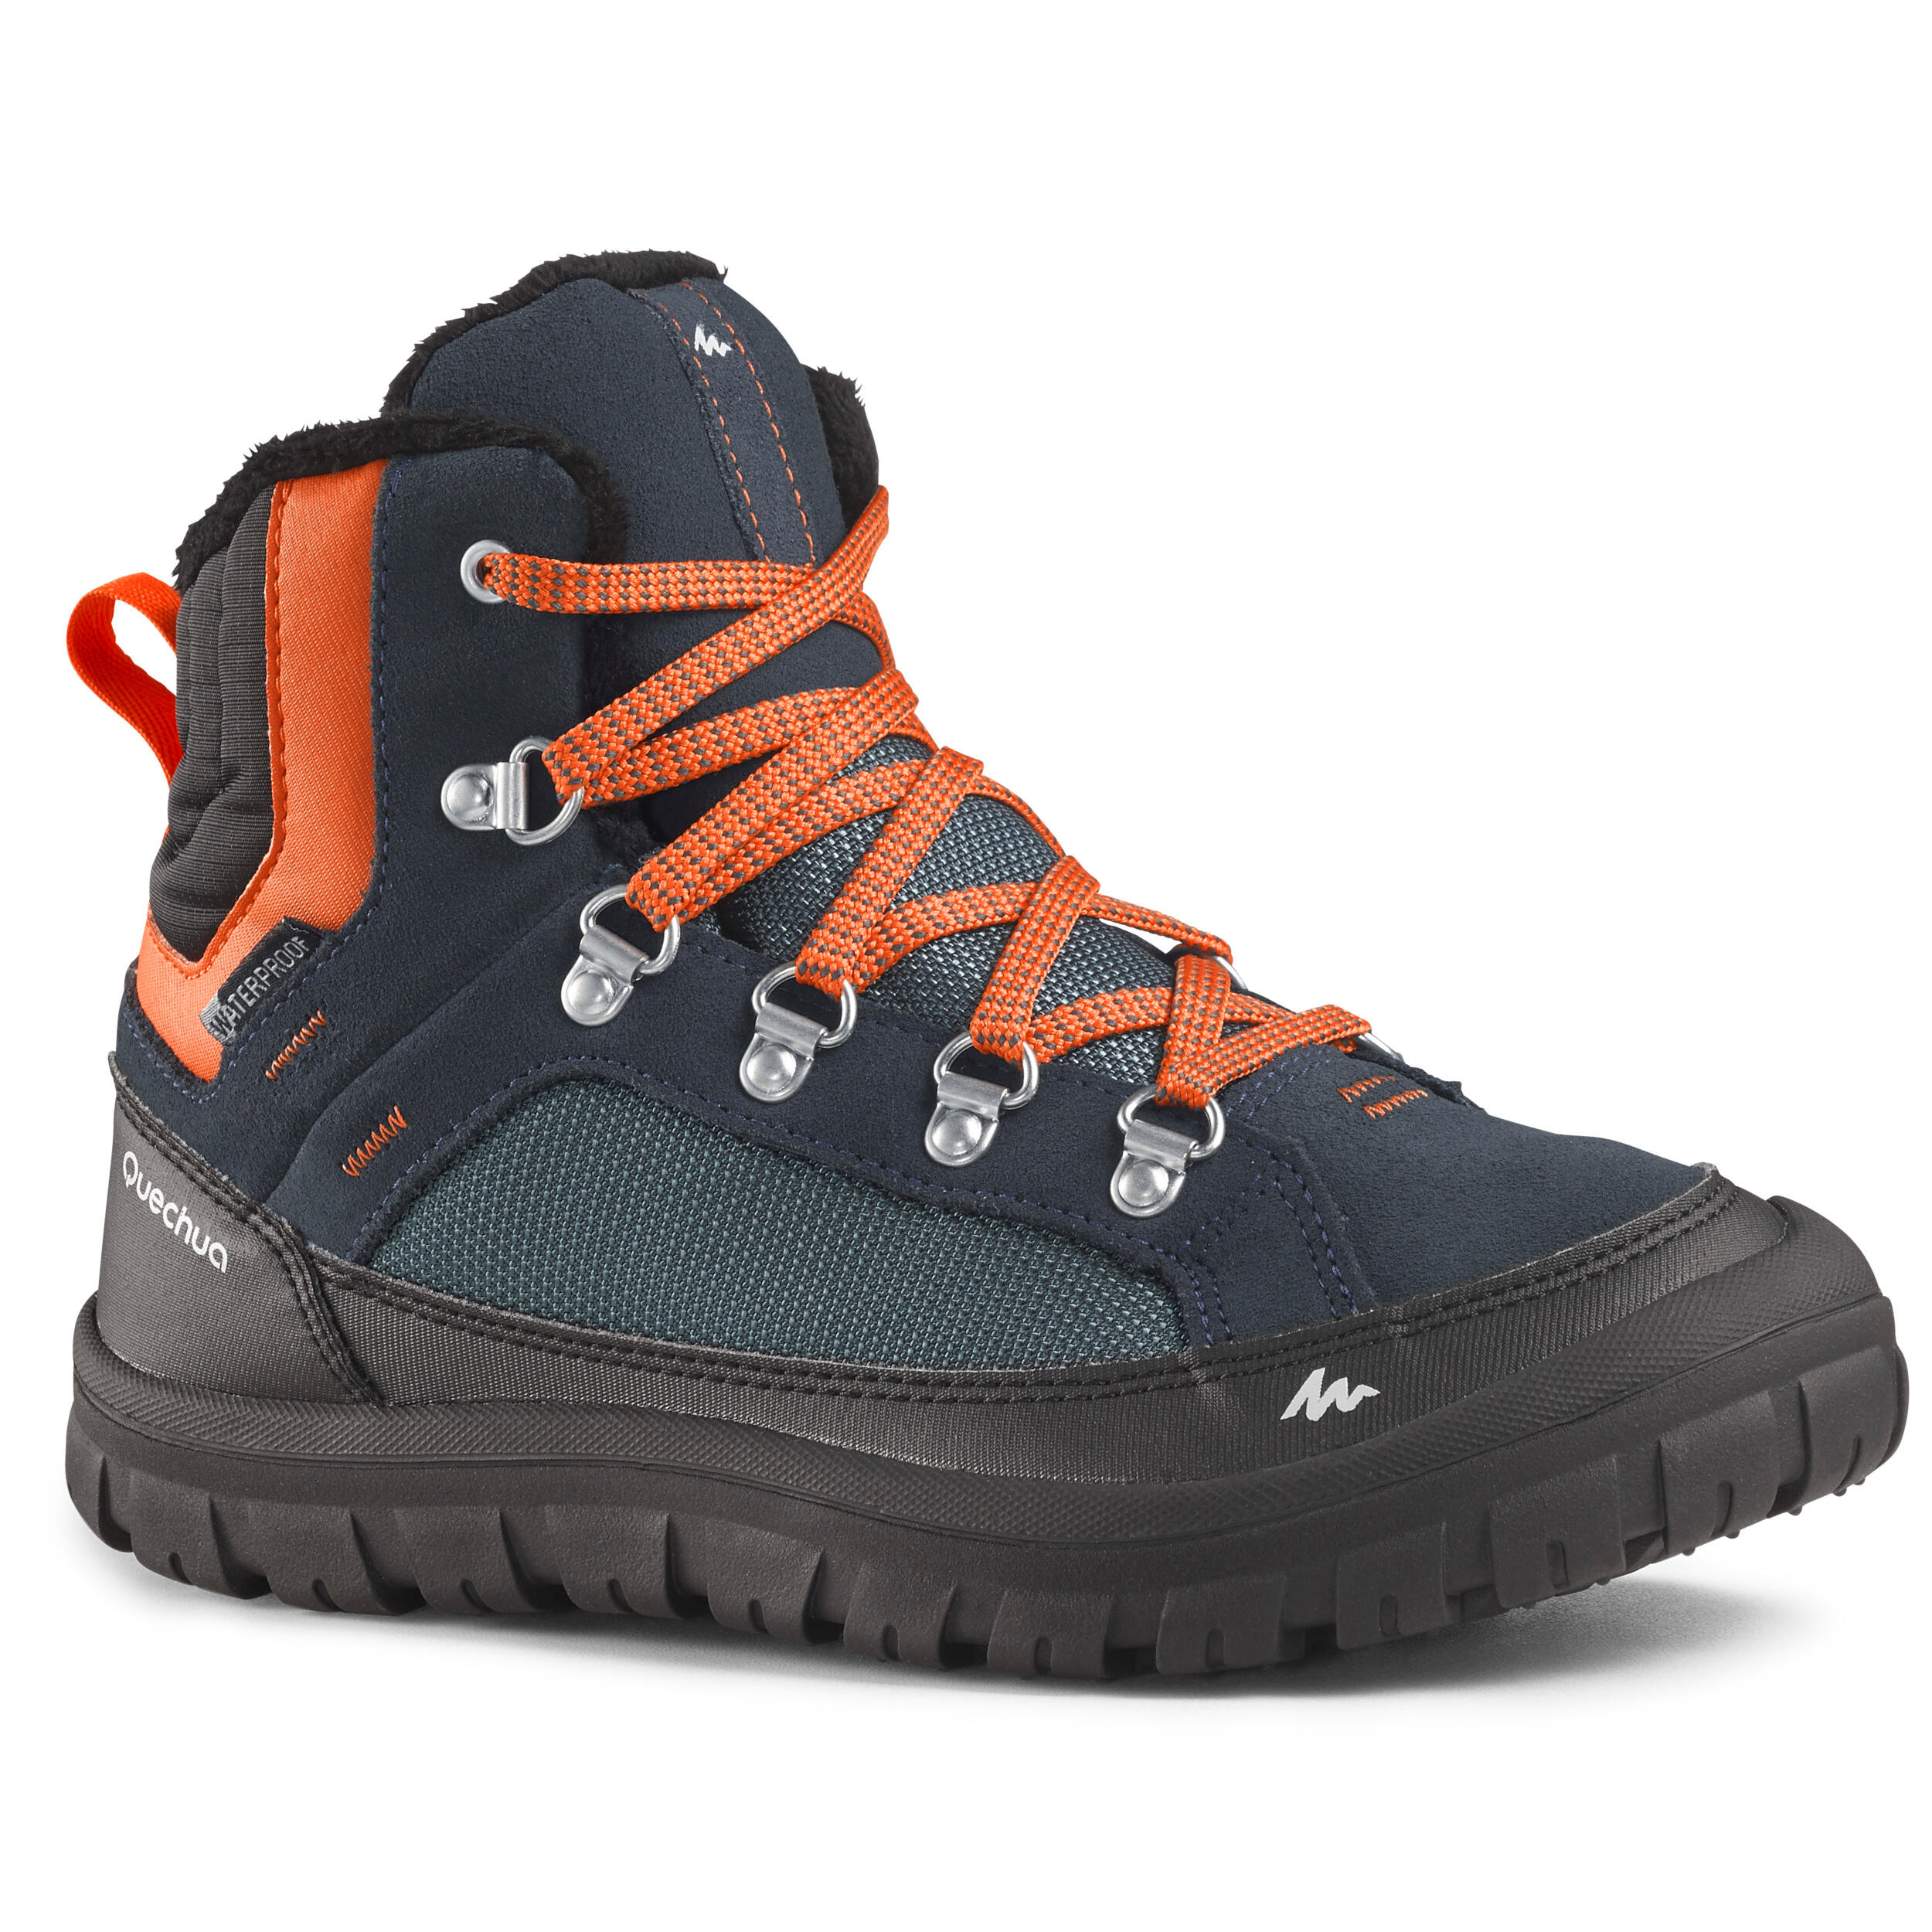 5 1 hiking boots